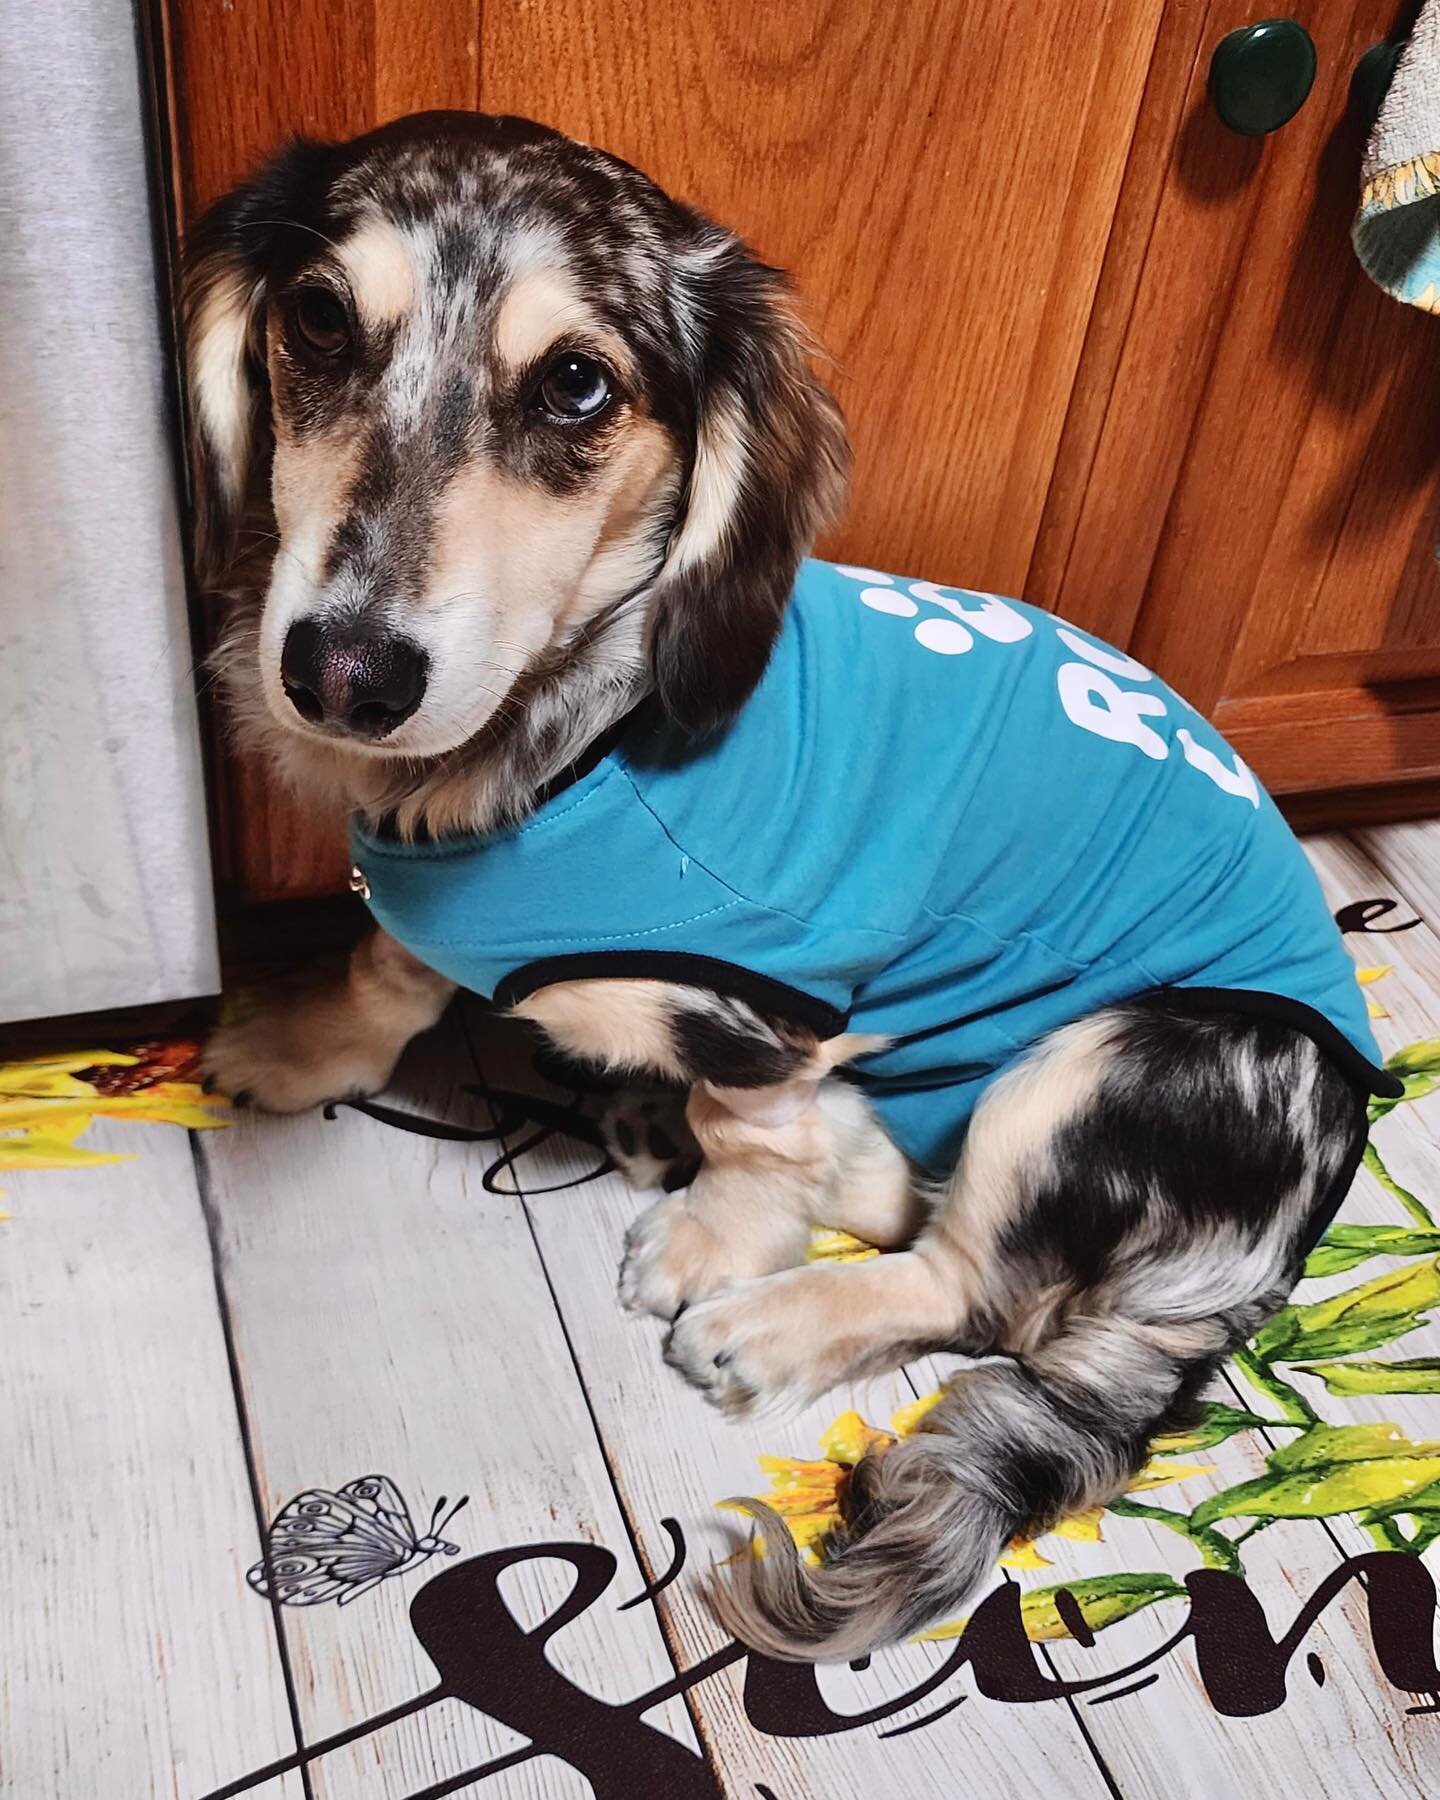 Doesn&rsquo;t Atreyu look adorable in his BellyGuard?! Blue is definitely his color! 😍 He is a long-haired dachshund, wearing a size small BellyGuard and weighs 16 pounds.

We would love to see your pup in their BellyGuard! Tag us in your next post 